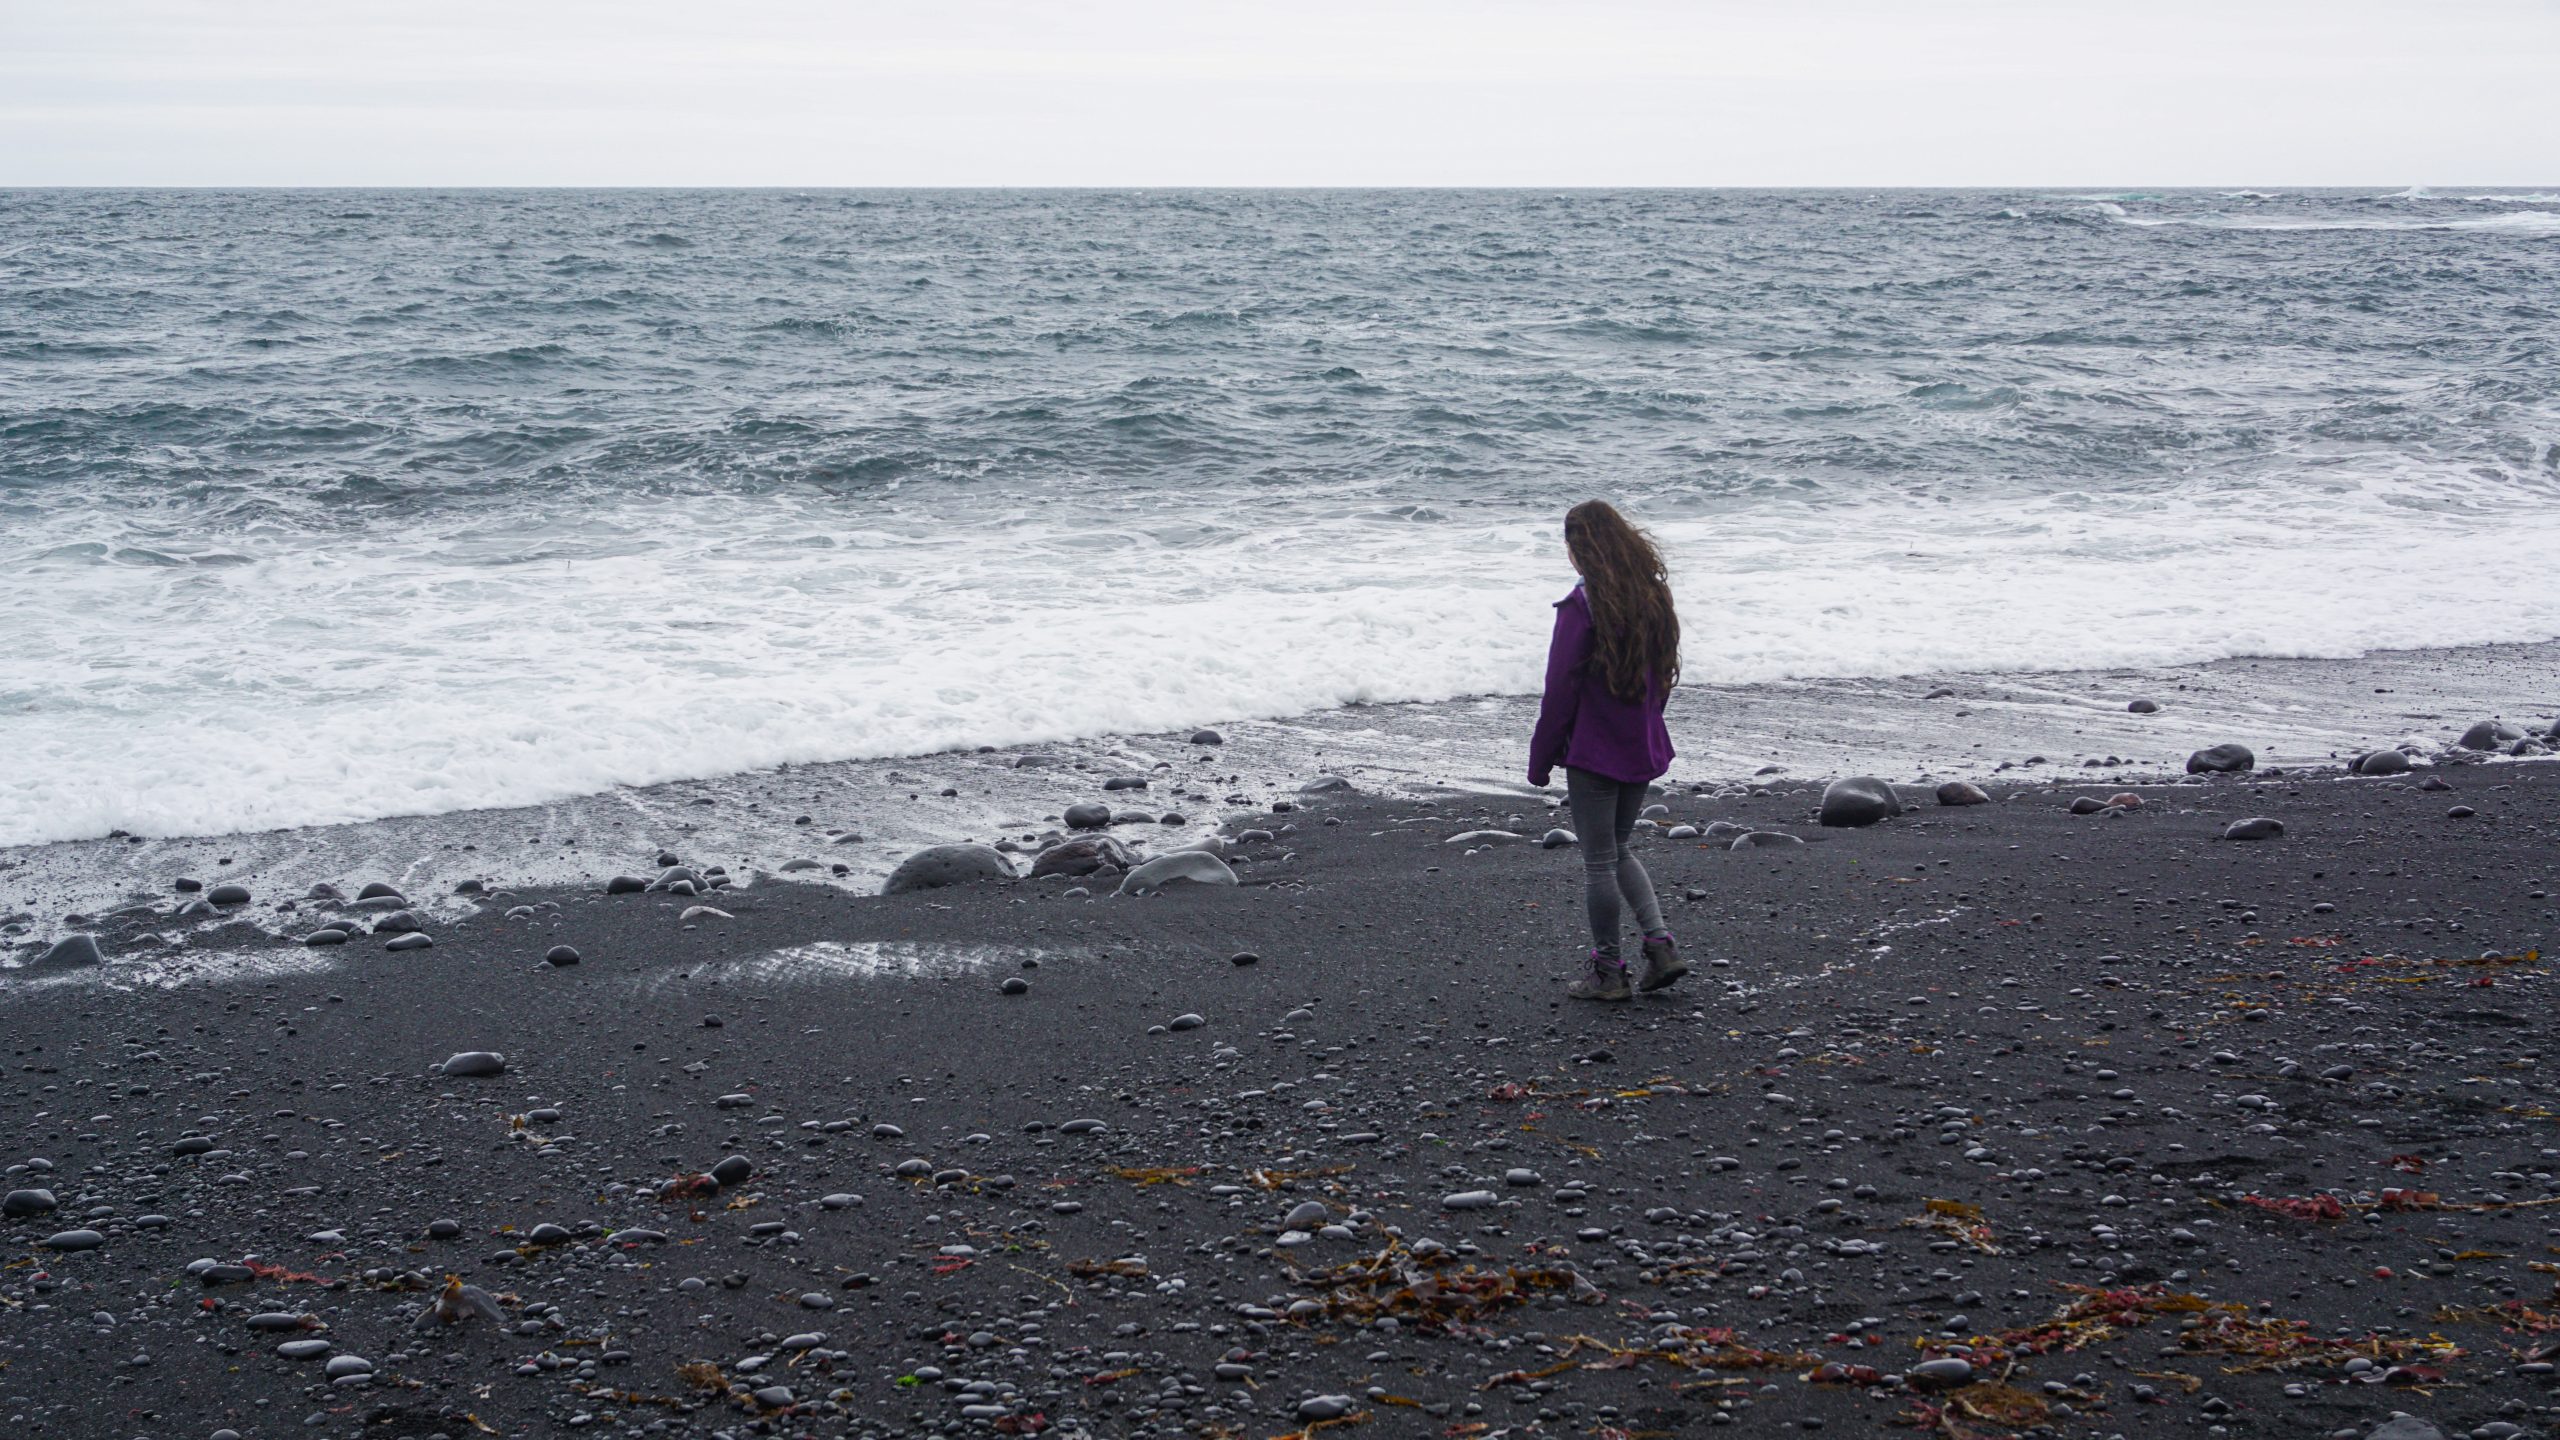 A girl with purple jacket walking towards the waves at a black sand beach in Iceland